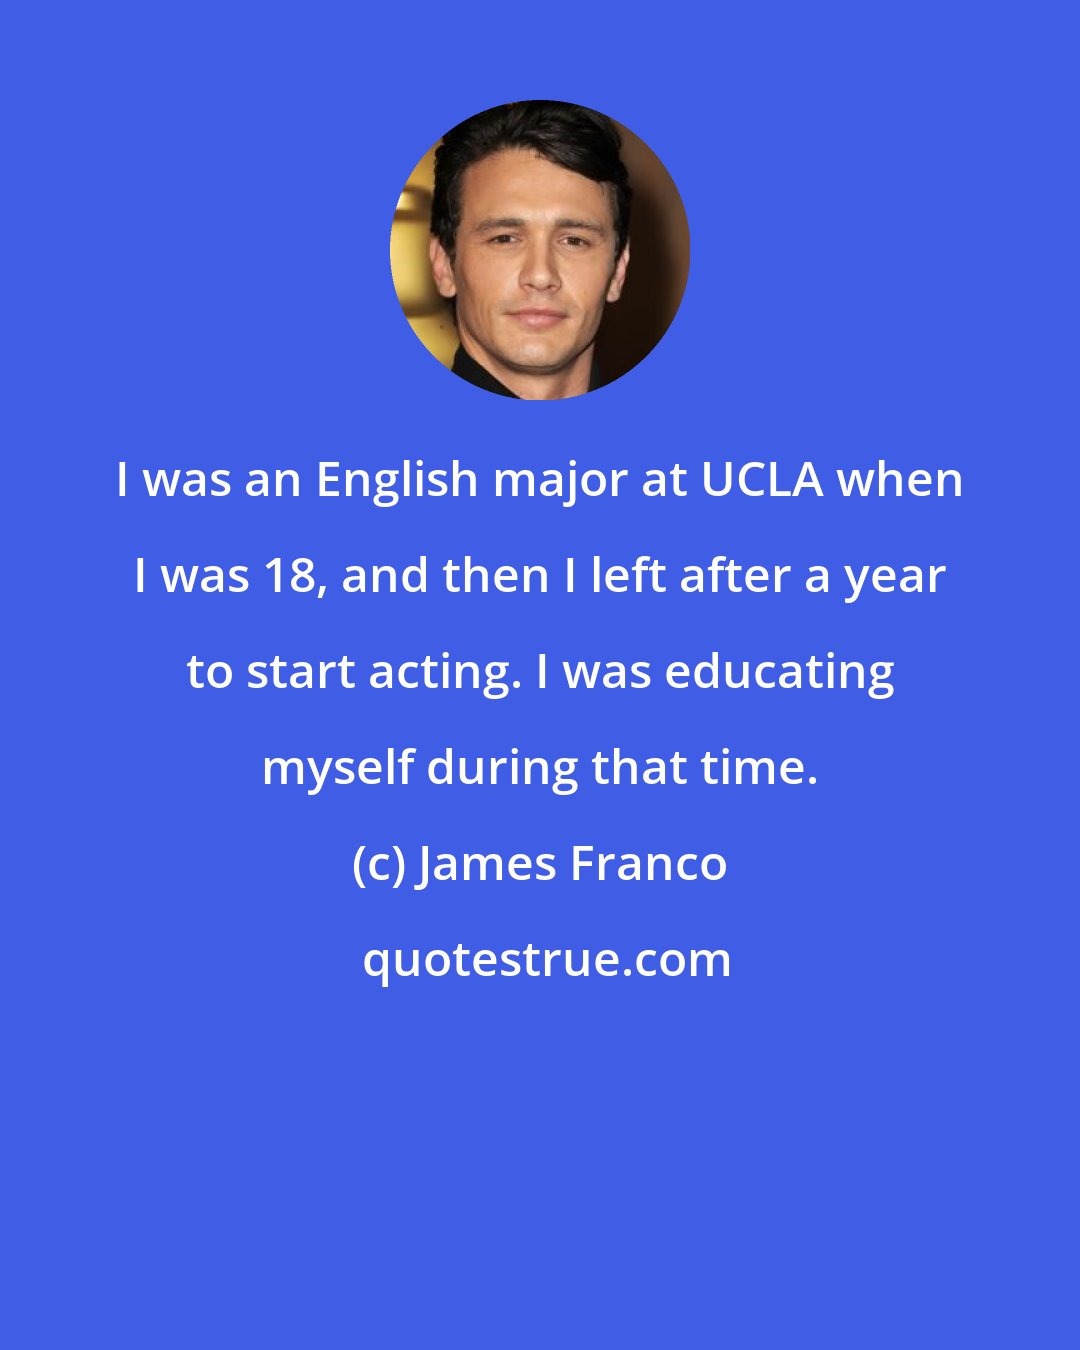 James Franco: I was an English major at UCLA when I was 18, and then I left after a year to start acting. I was educating myself during that time.